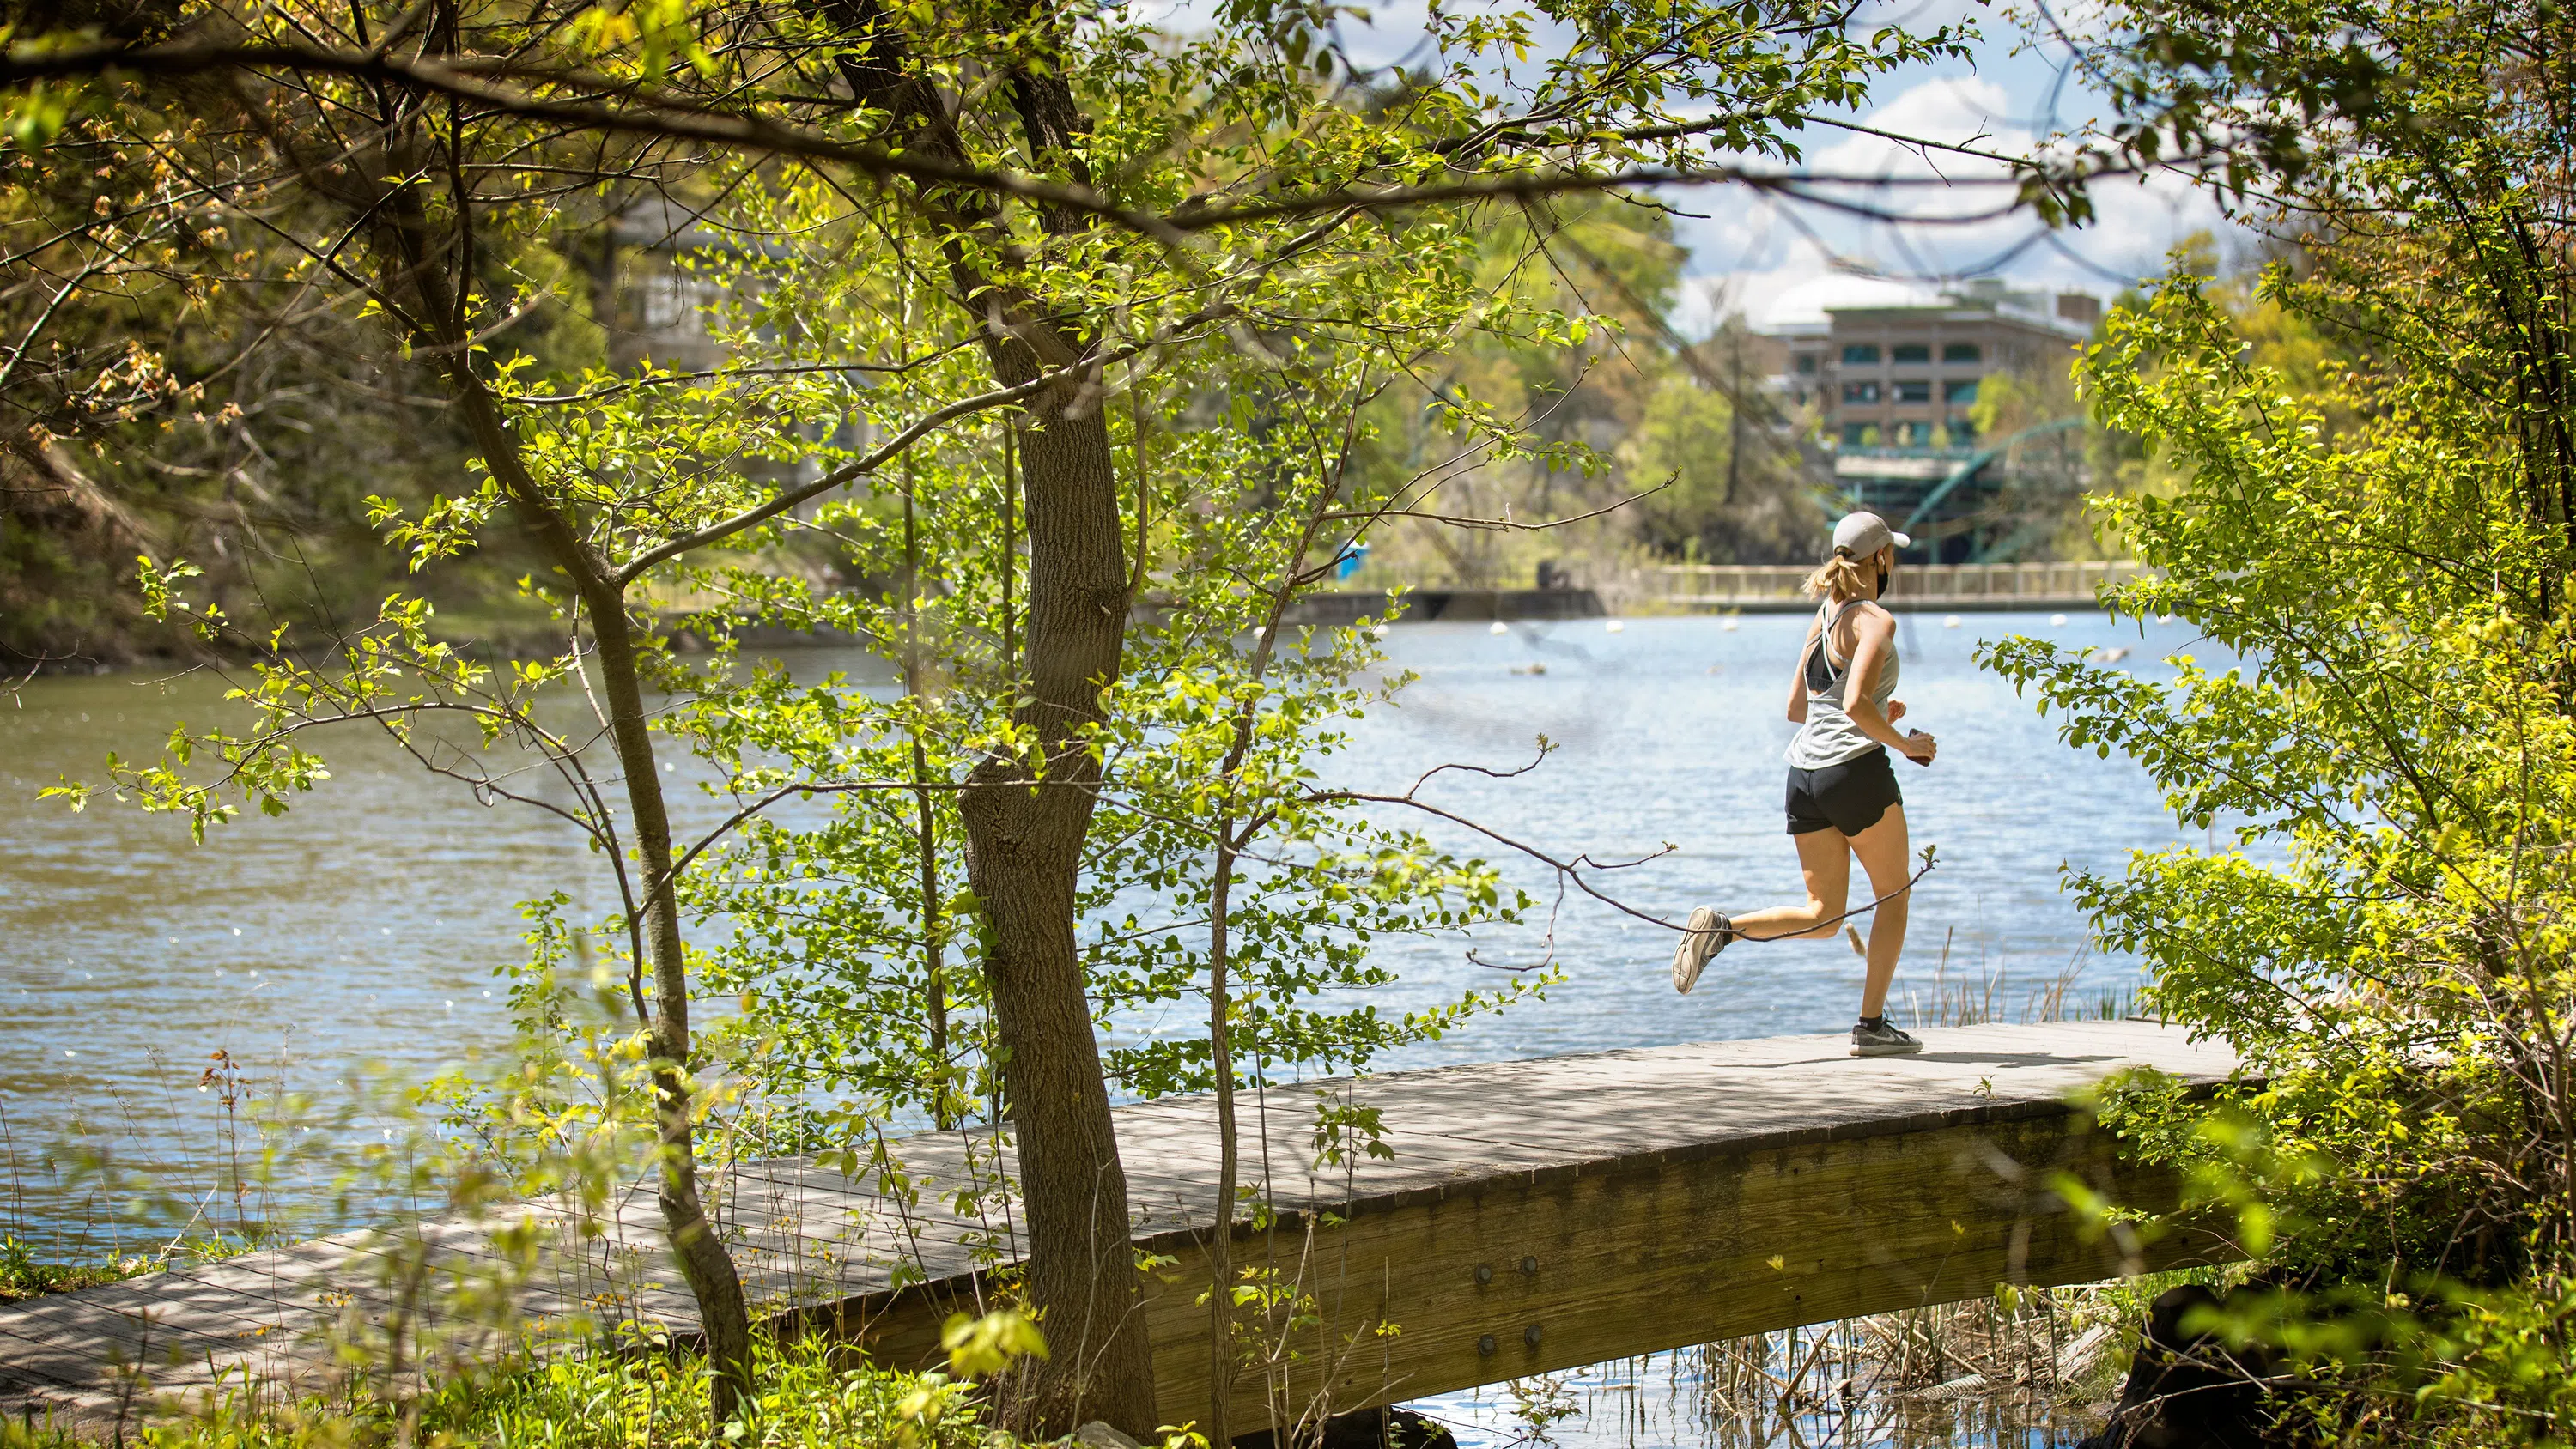 Numerous trails outline the edges of Beebe Lake, a favorite destination on campus for runners, hikers and others who enjoy the outdoors.